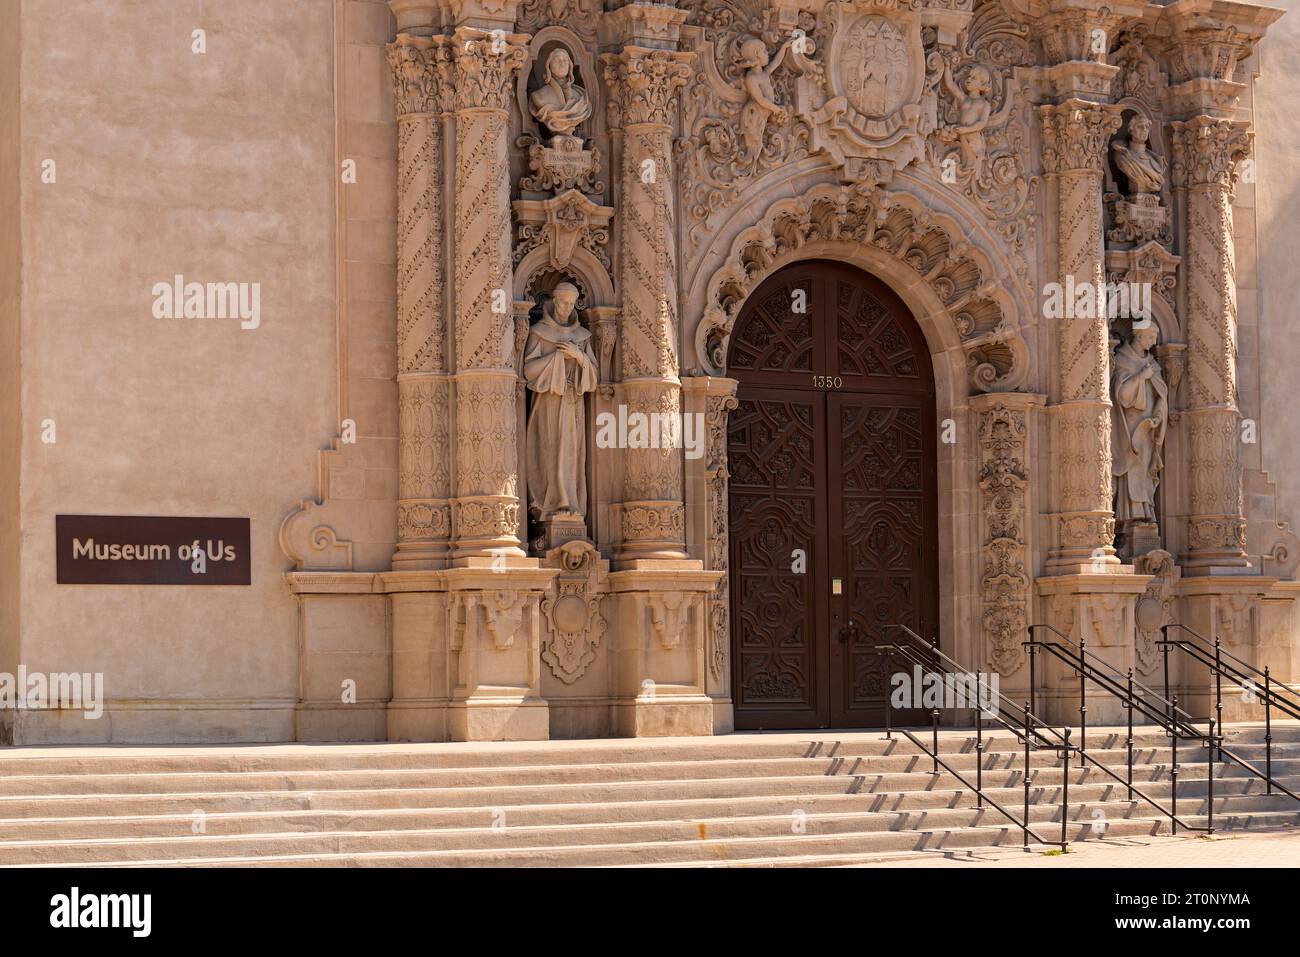 The entrance to Balboa Park's Museum of Us, formally known as the Museum of Man. Stock Photo